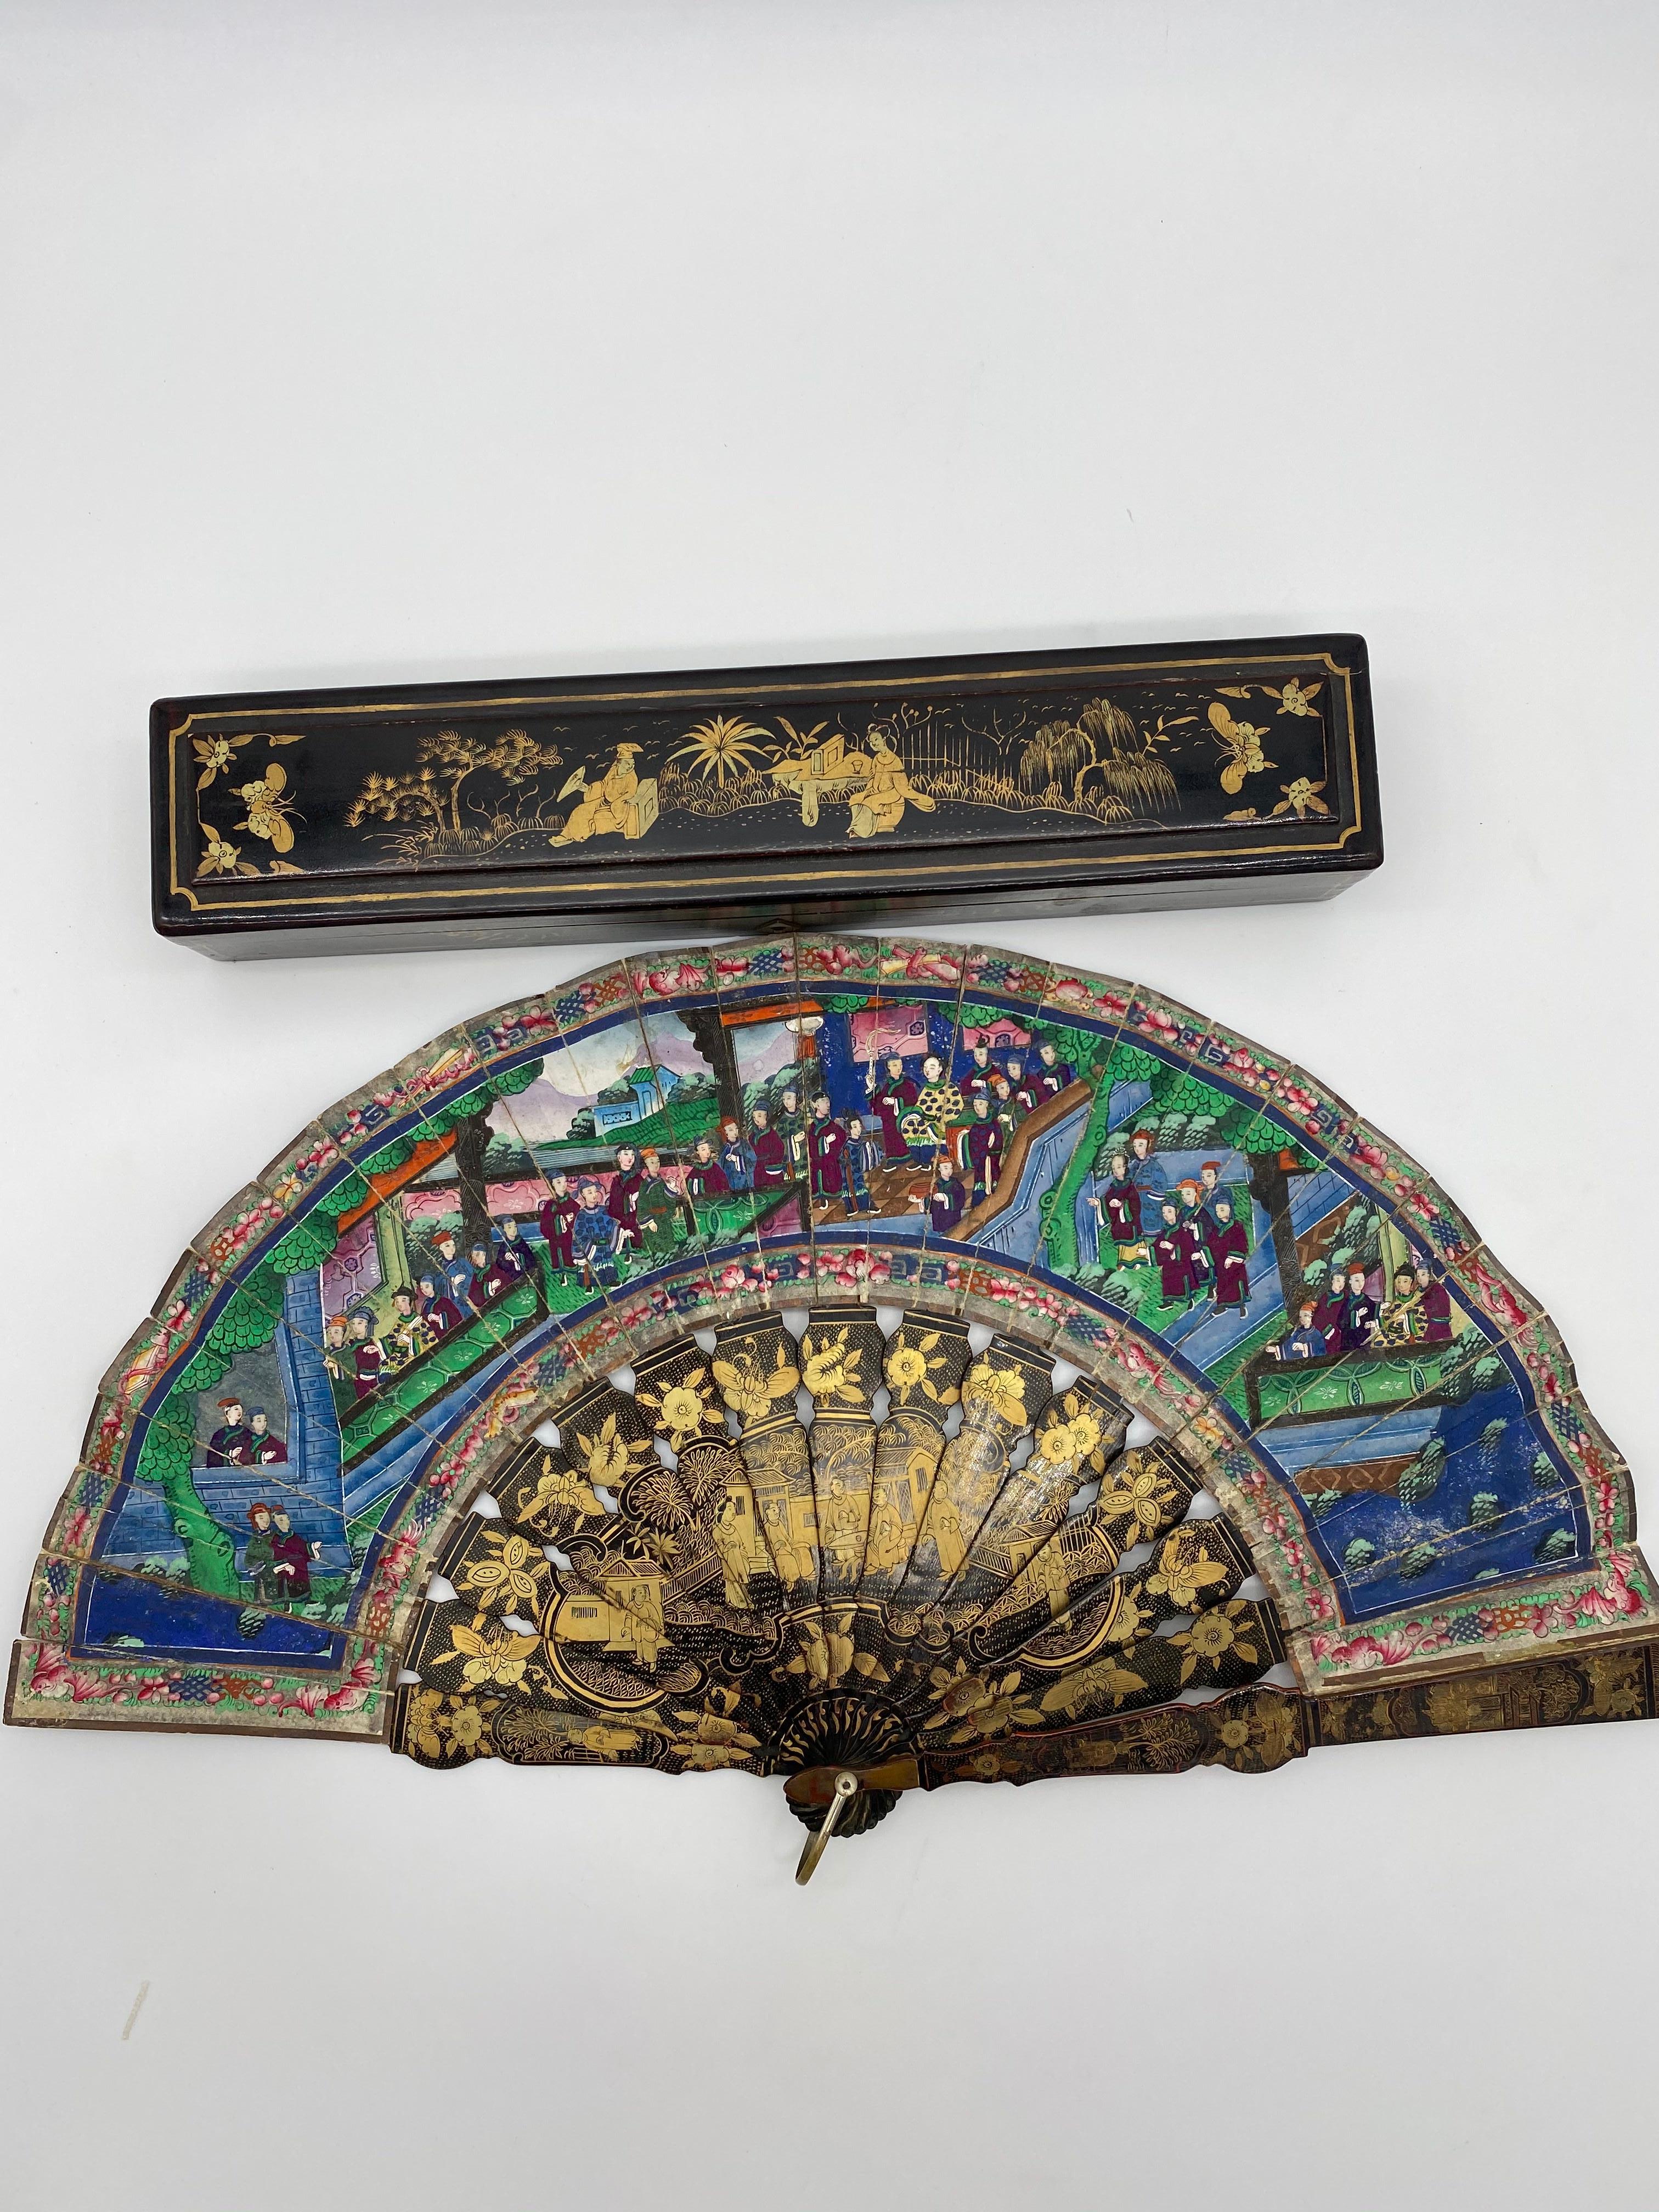 Qing 19th Century Chinese Gilt Lacquer Fan with Landscape 100 Faces